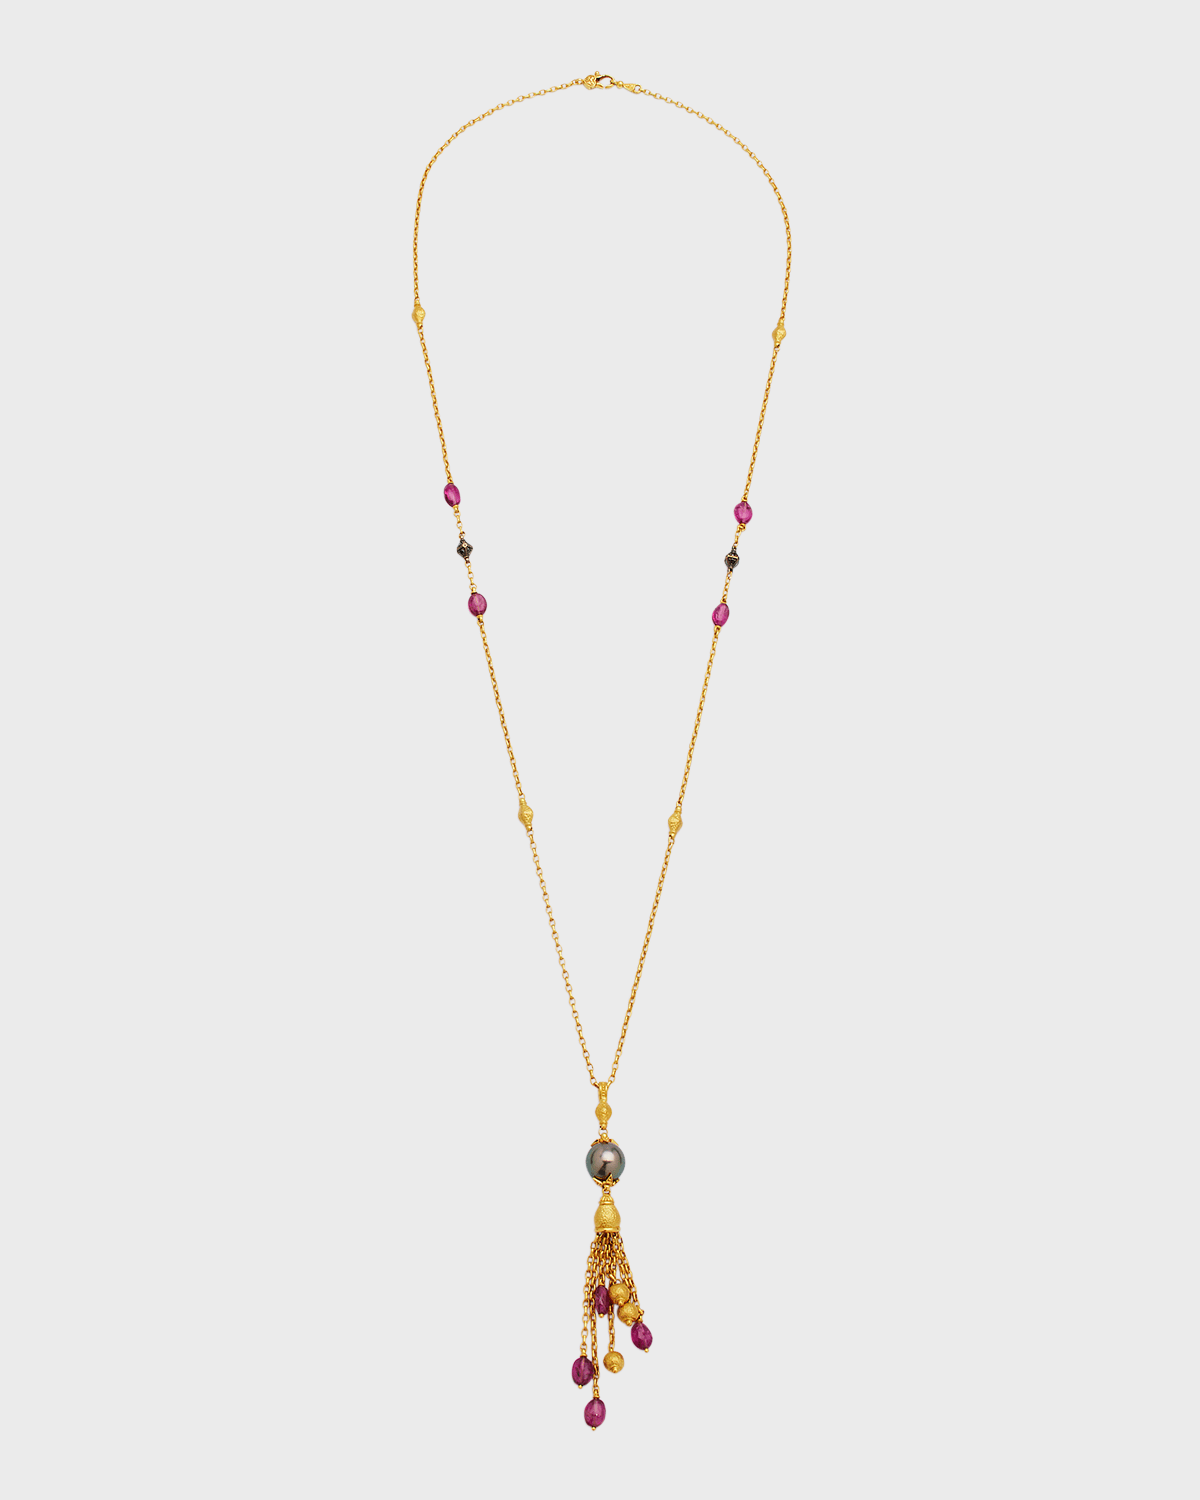 18K Pearl Pendant Necklace with Topaz and Tourmaline